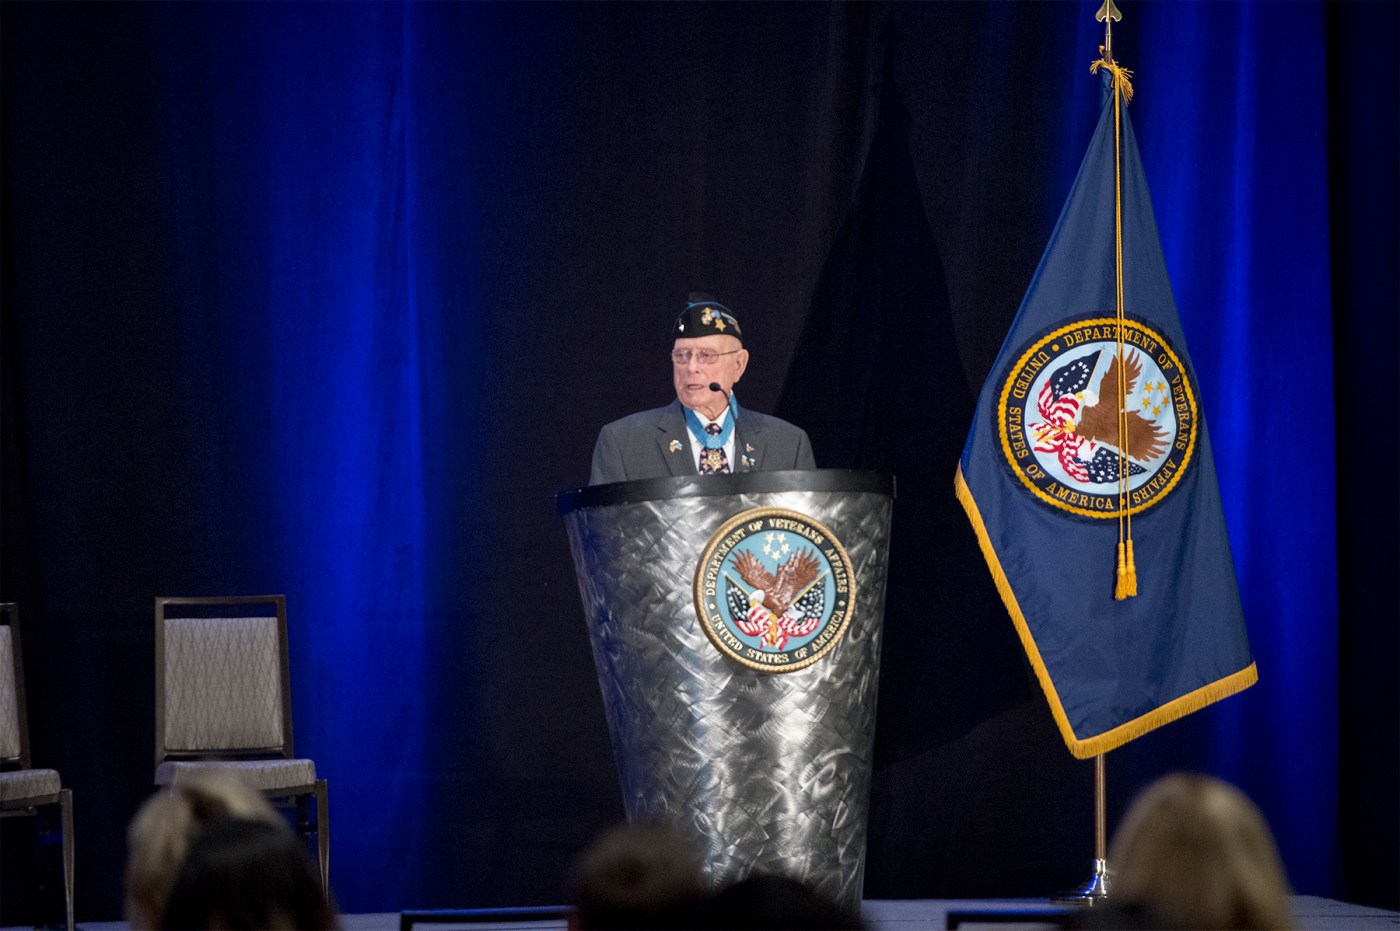 Herschel "Woody" Williams, Medal of Honor Recipient addresses crowd at the VA PX Symposium.